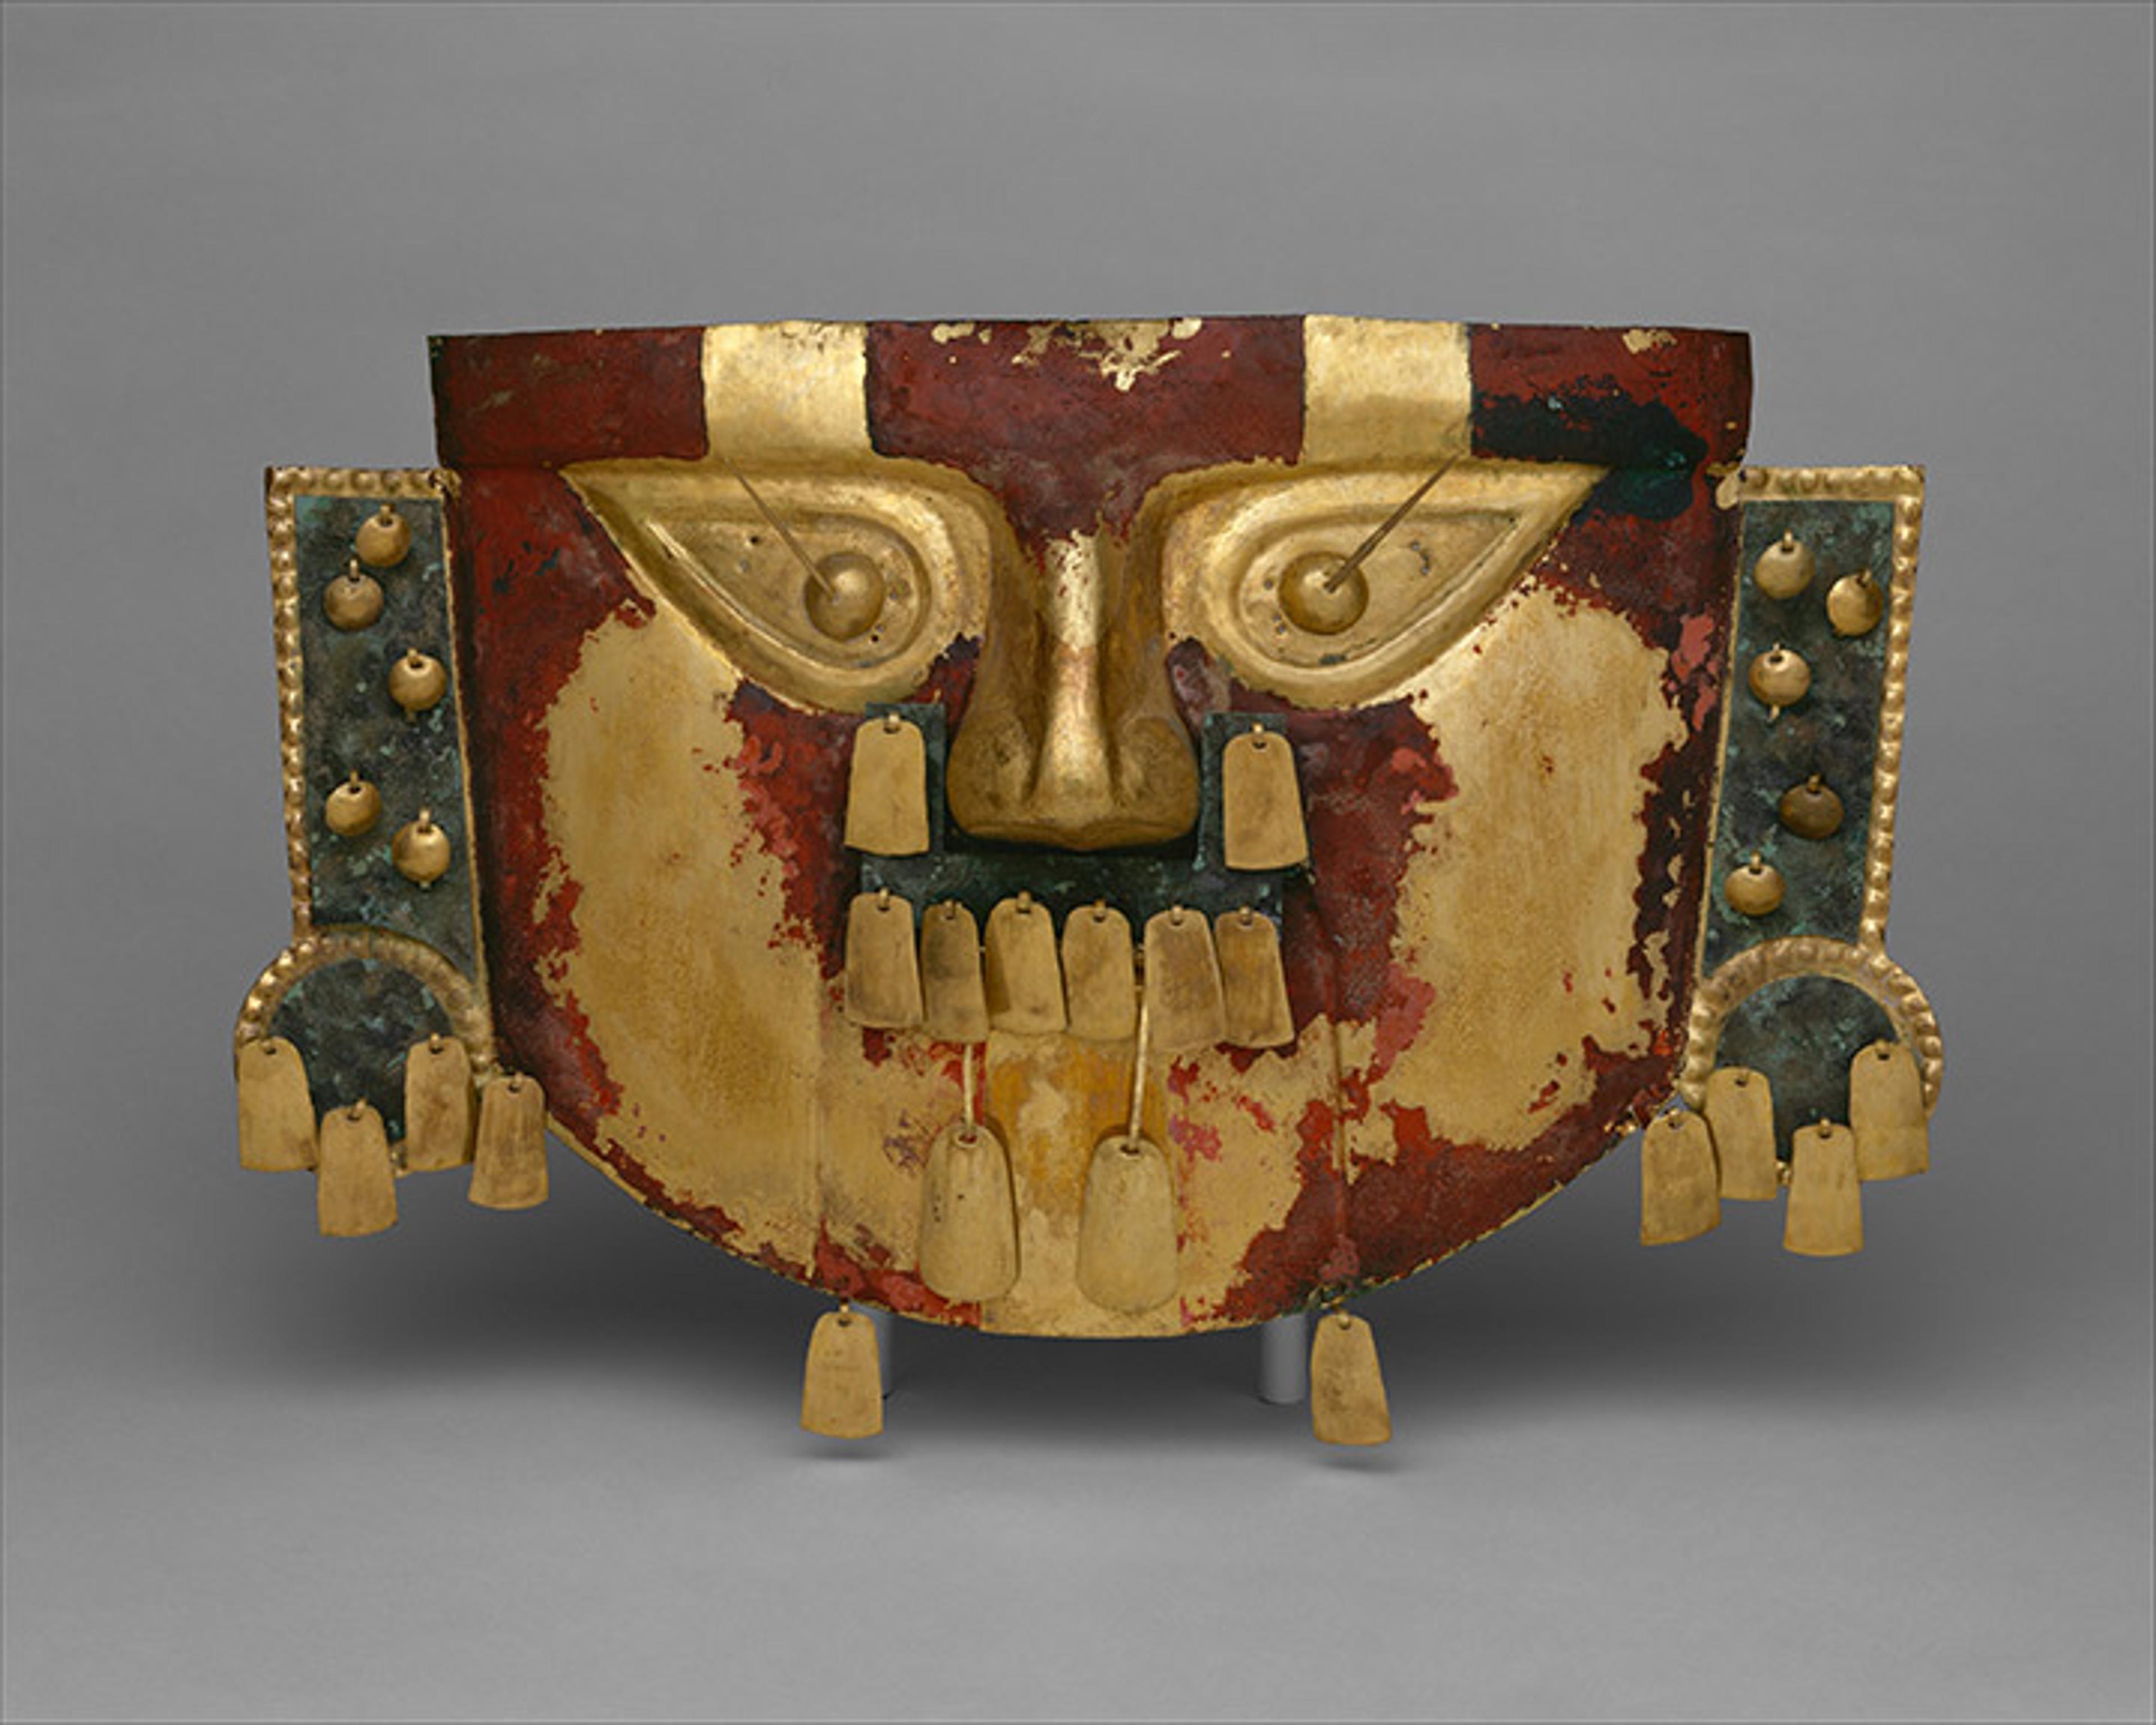 Funerary mask from Peru in red and gold